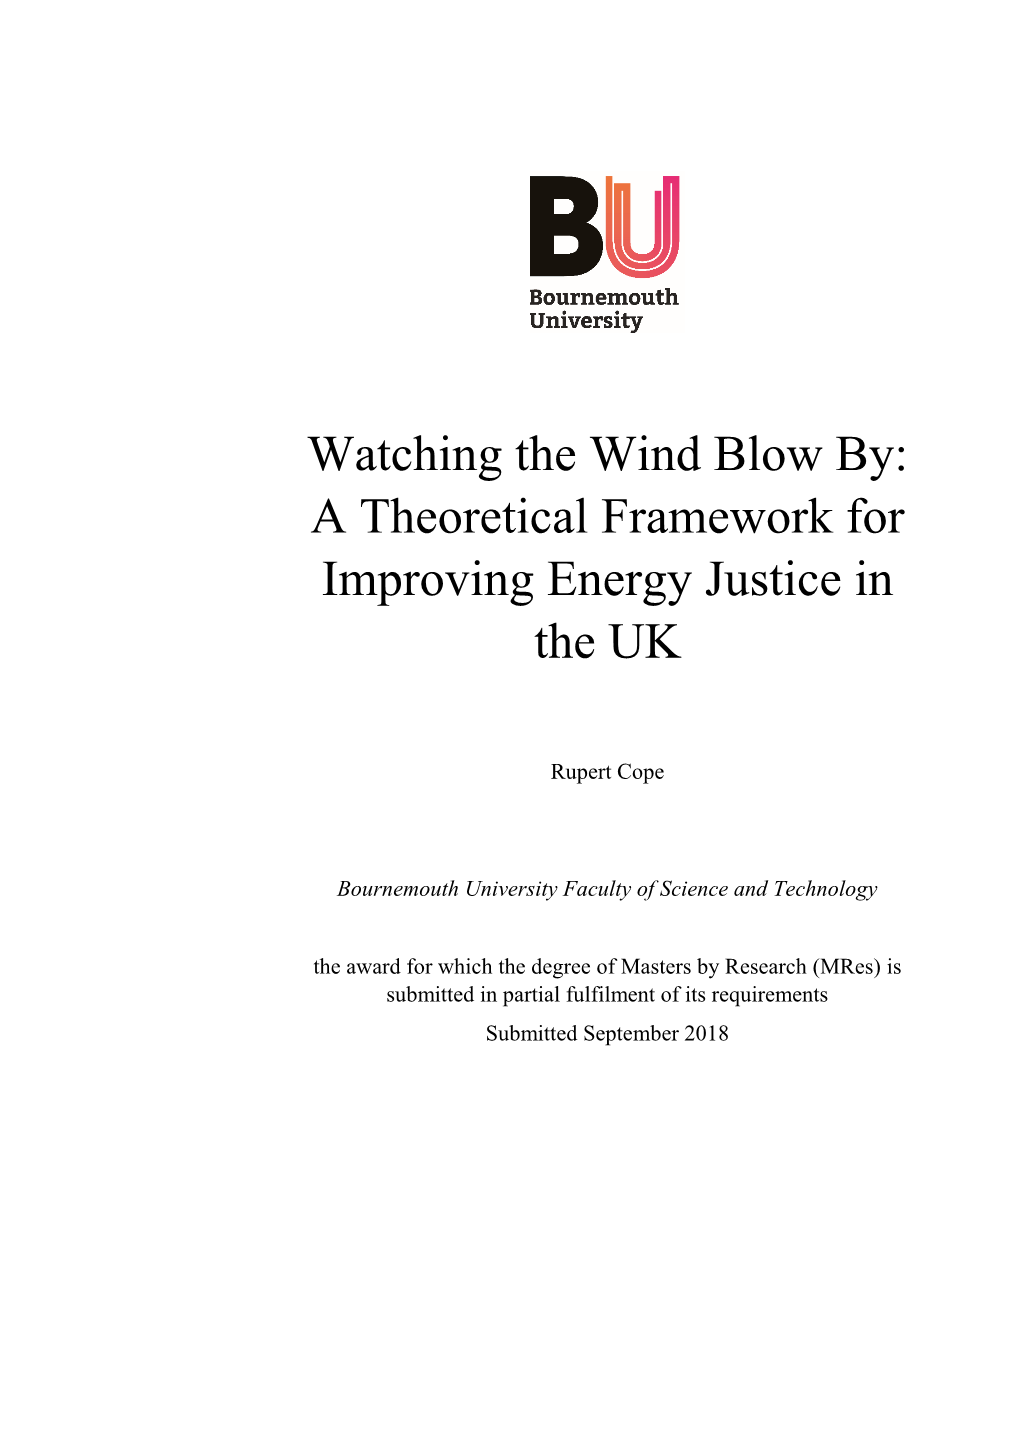 A Theoretical Framework for Improving Energy Justice in the UK